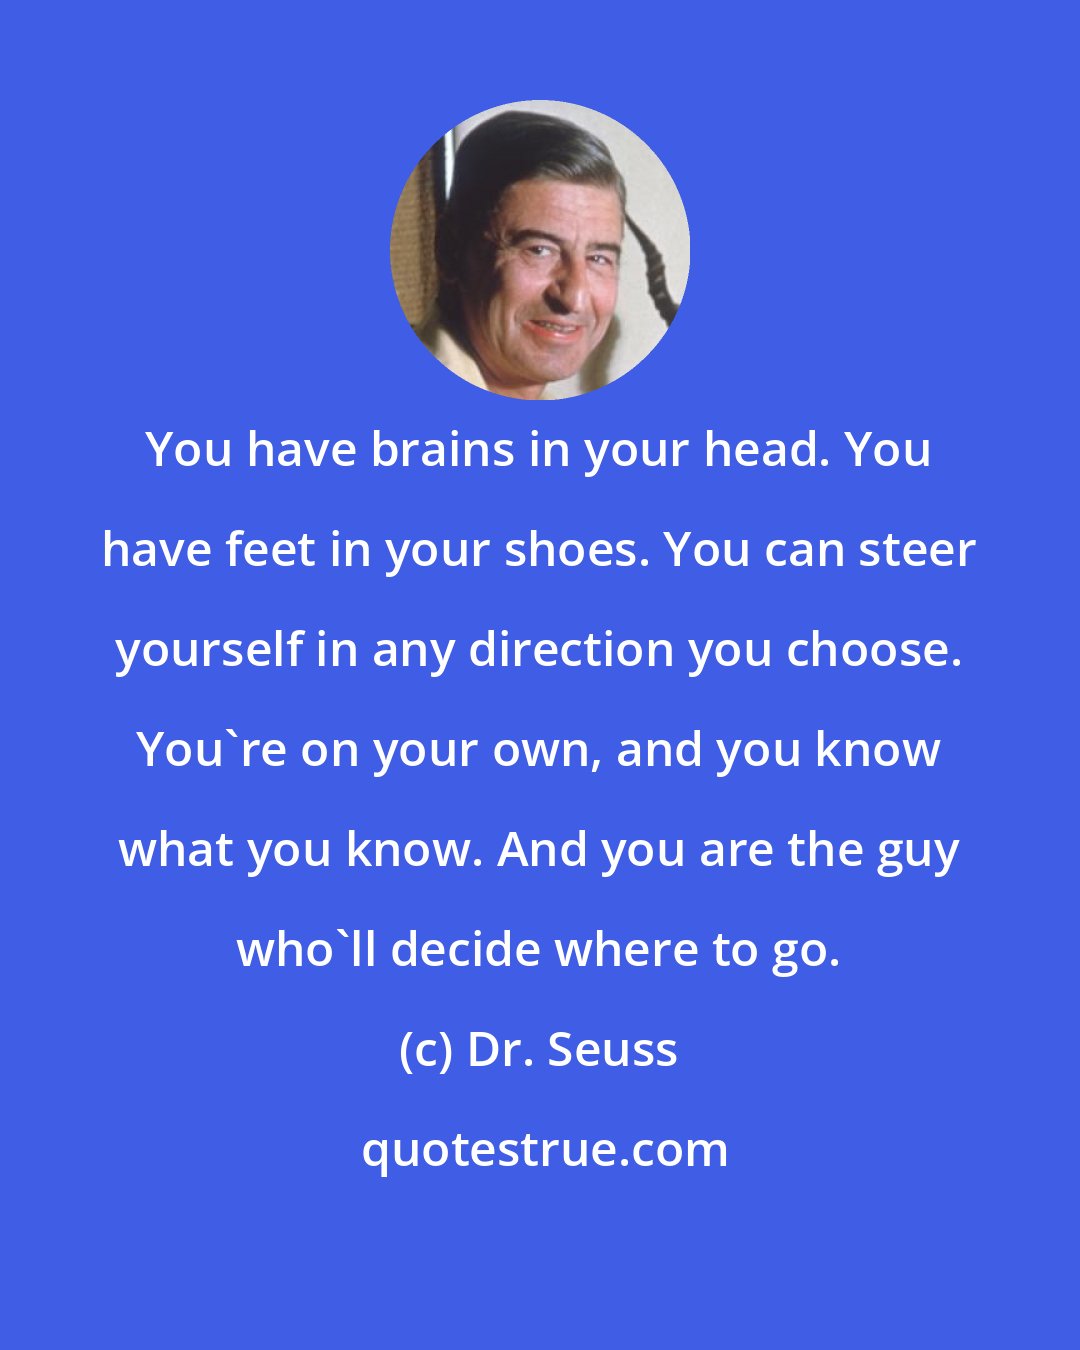 Dr. Seuss: You have brains in your head. You have feet in your shoes. You can steer yourself in any direction you choose. You're on your own, and you know what you know. And you are the guy who'll decide where to go.